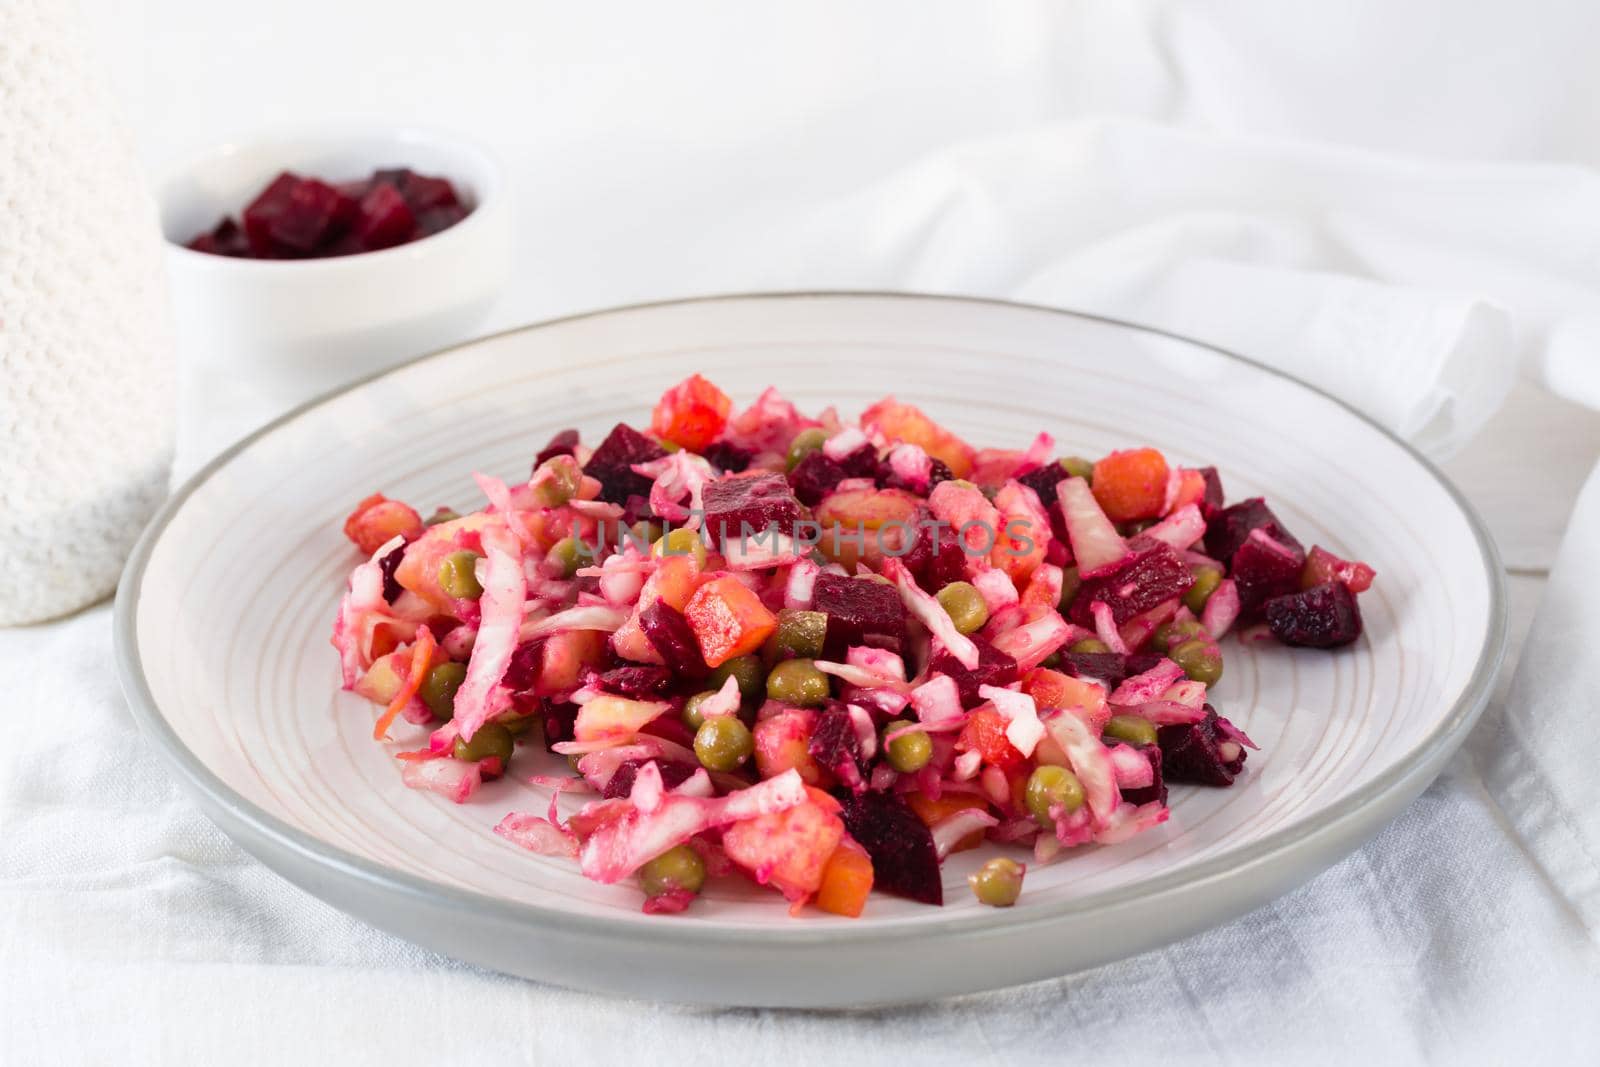 Russian traditional salad with vegetables - vinaigrette on a plate and a bowl of beets on a table on a cloth. Close-up by Aleruana